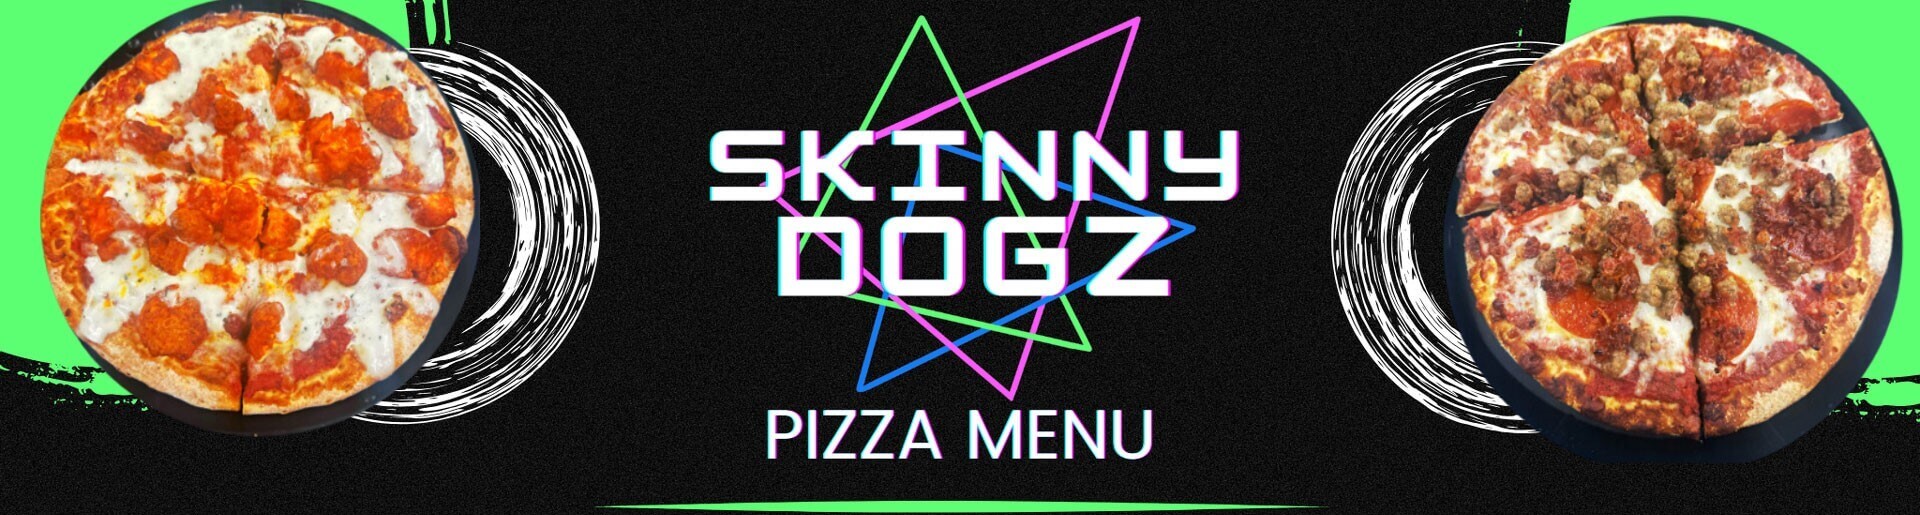 Skinny Dogz Pizza menu showcasing a selection of mouthwatering pizzas.